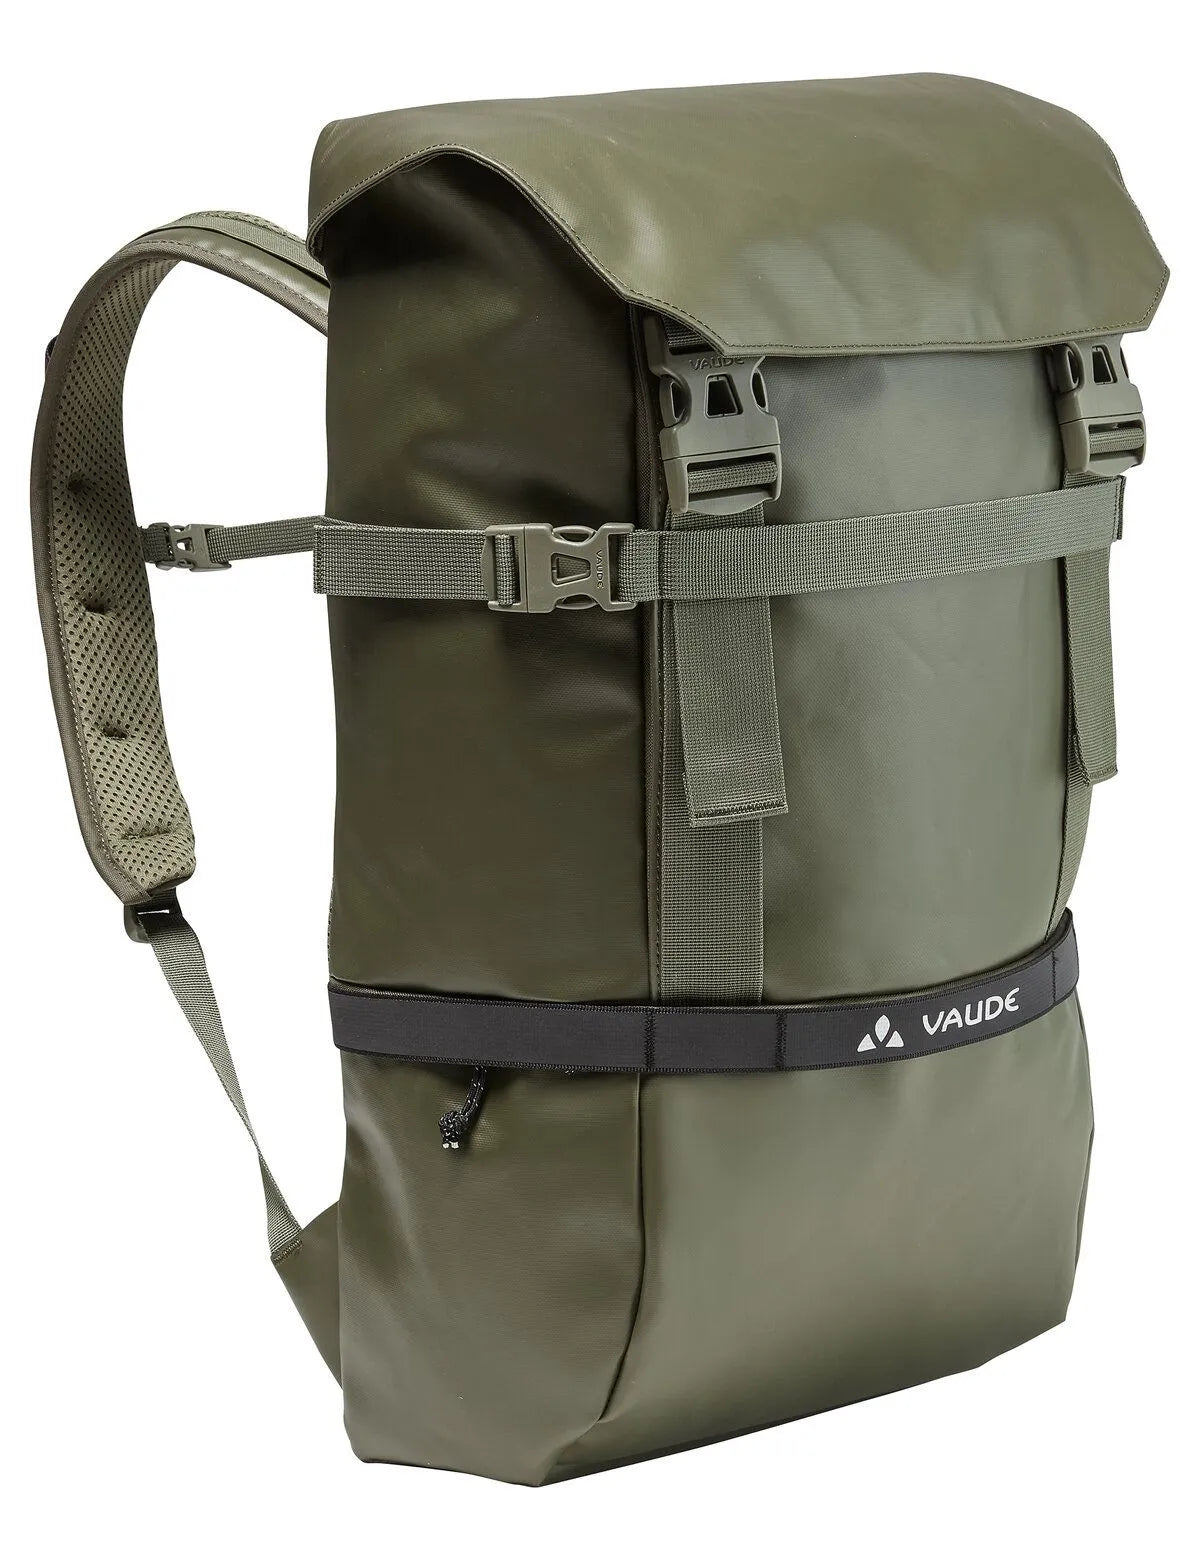 Vaude Mineo Backpack 30 - Recycled Polyester Khaki Bags